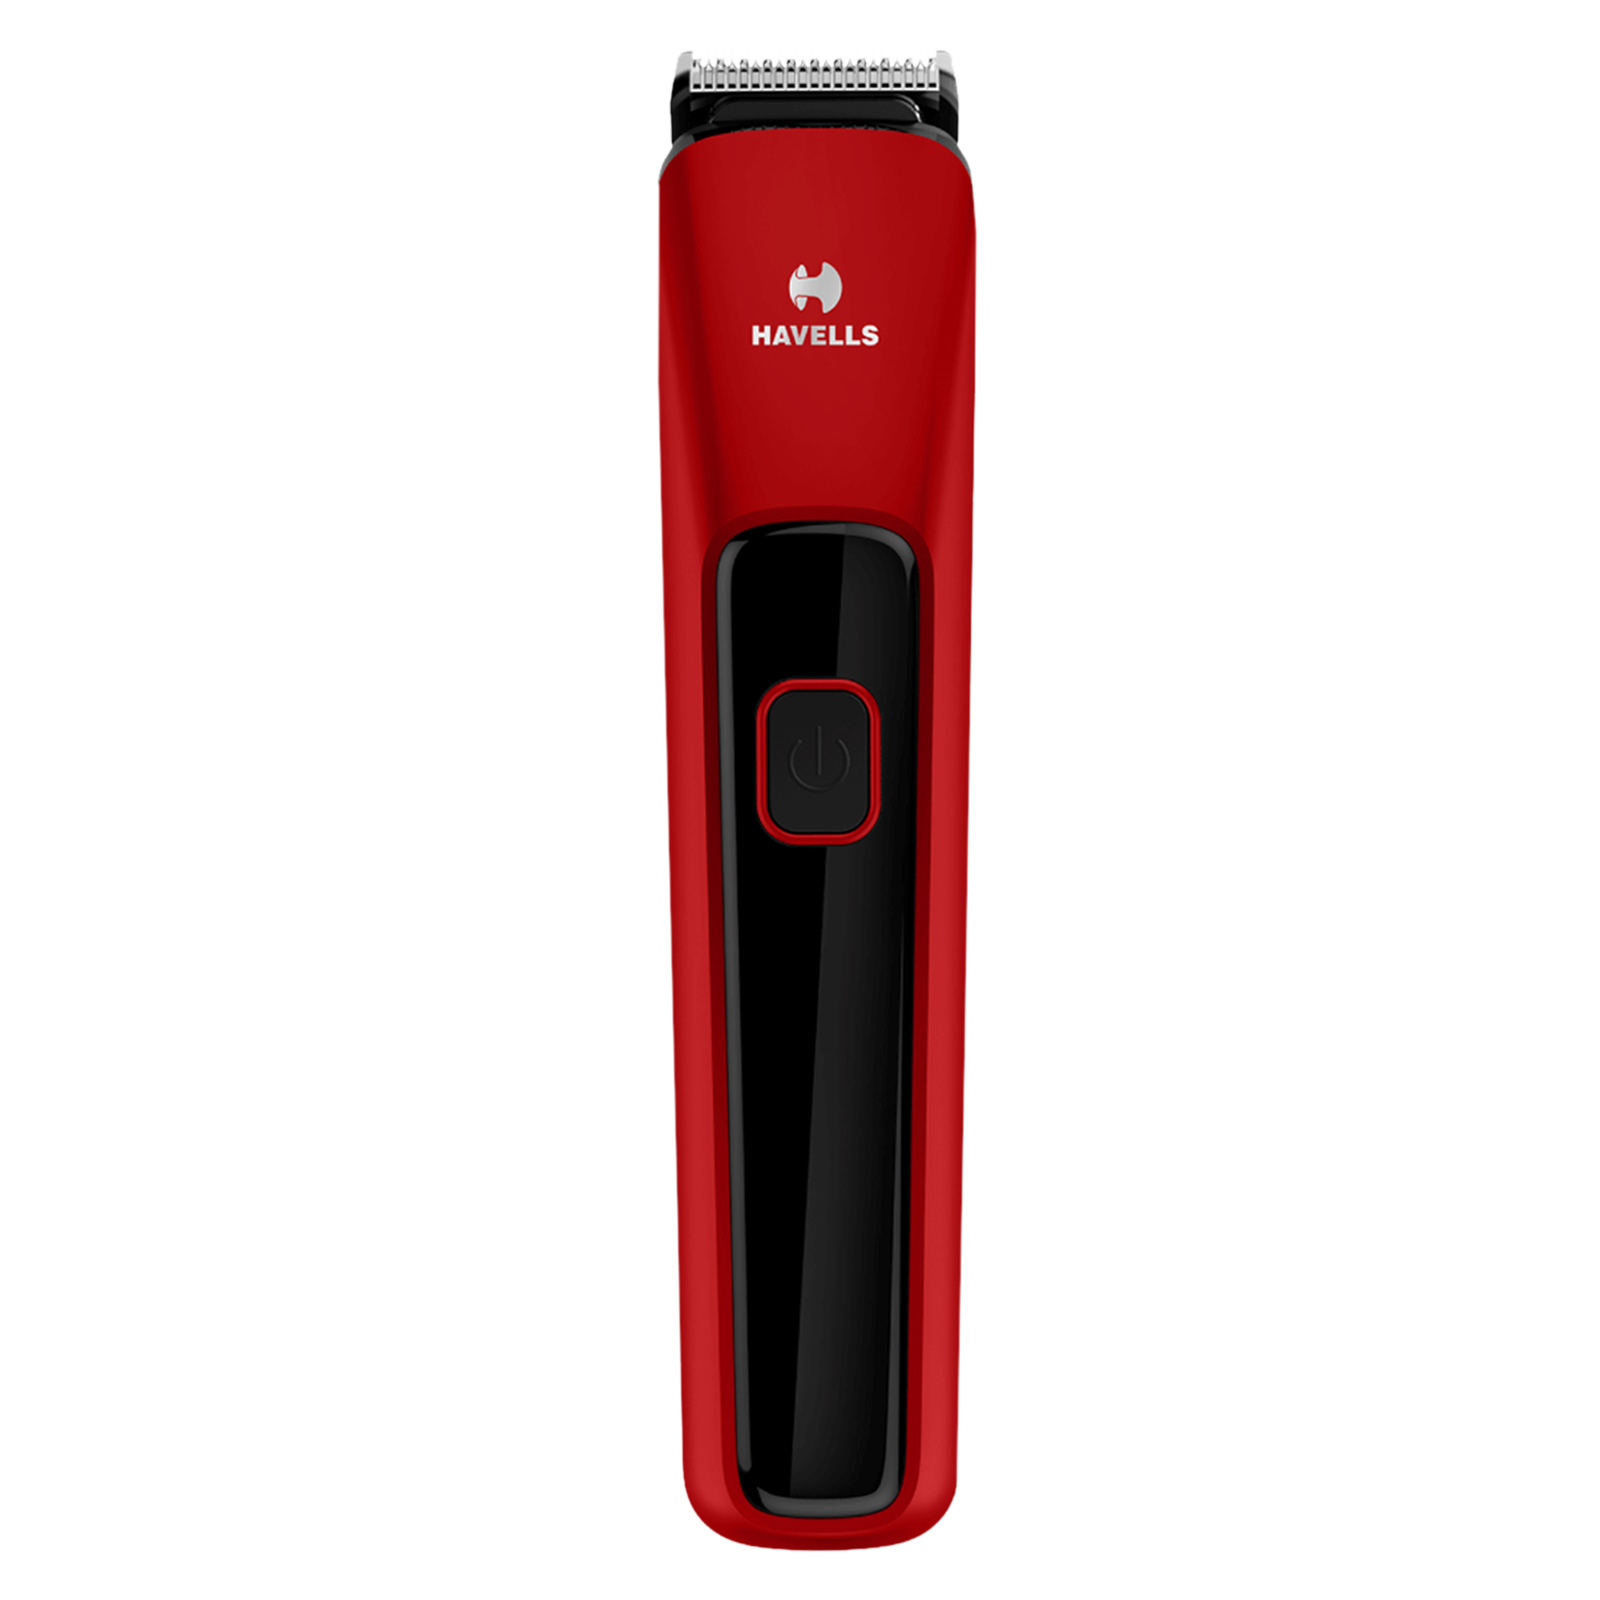 HAVELLS BT5111C Rechargeable Cordless Dry Trimmer for Beard, Moustache & Body Grooming with 4 Length Settings for Men (45mins Runtime, LED Indicator, Red)